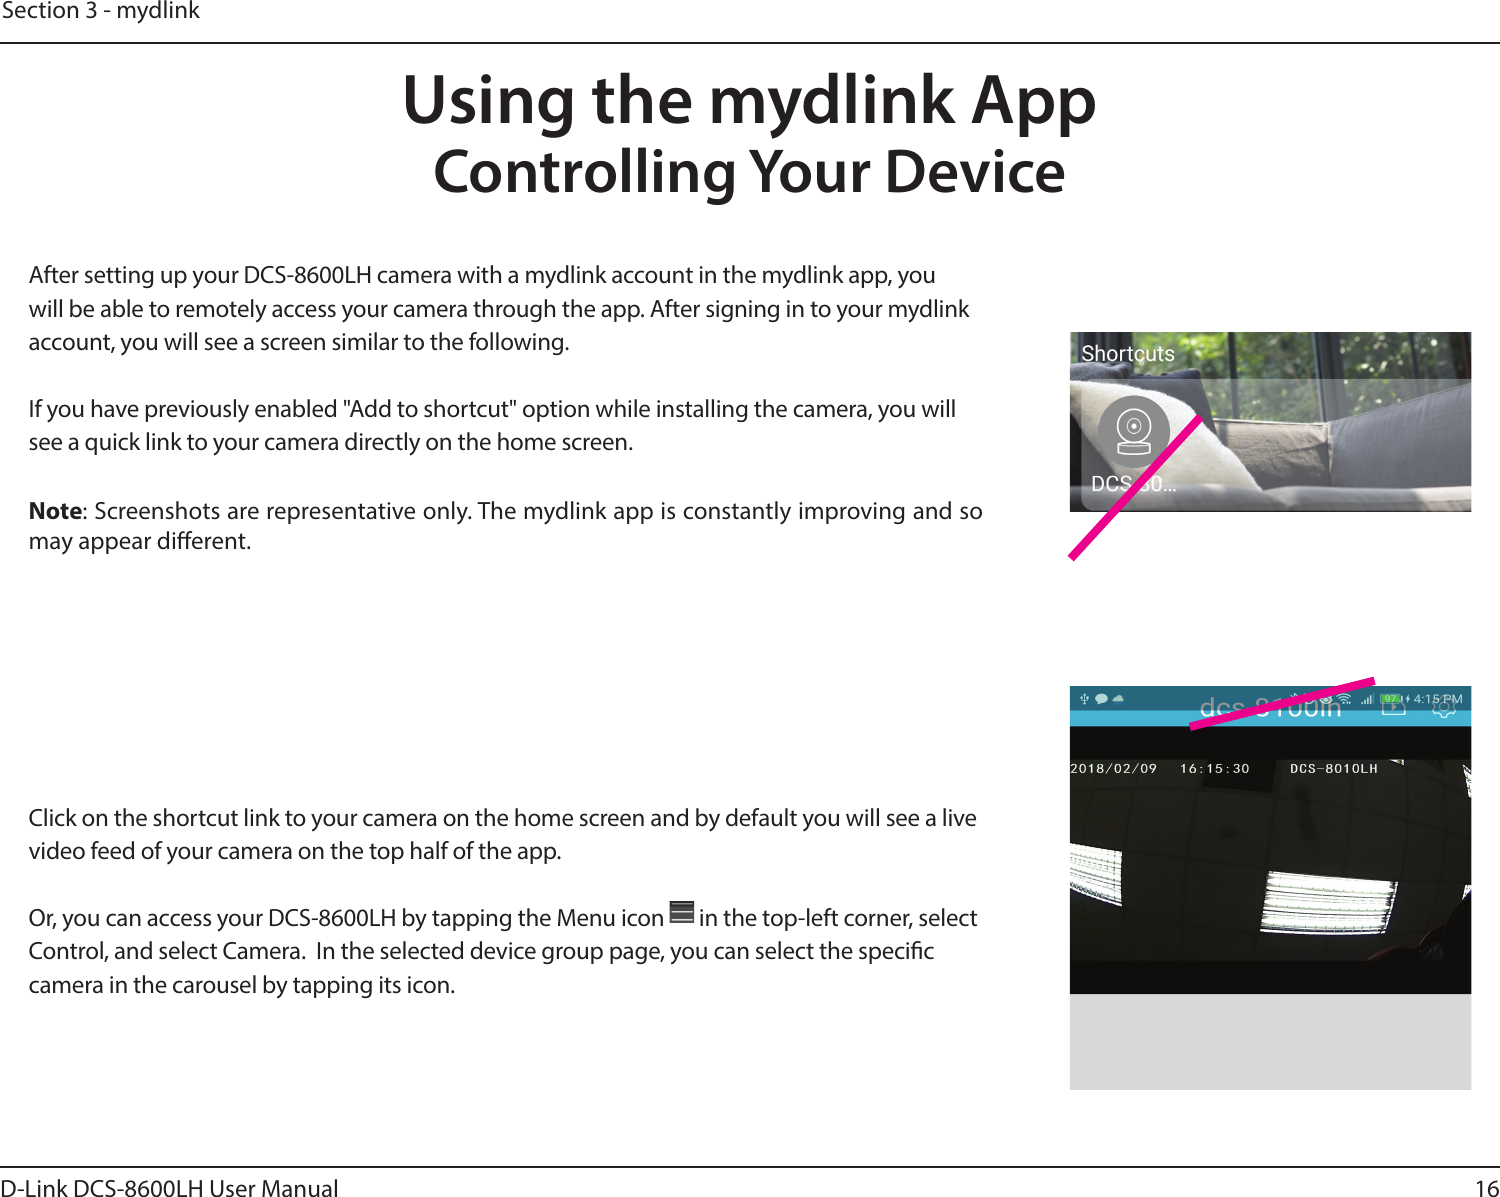 16D-Link DCS-8600LH User ManualSection 3 - mydlinkUsing the mydlink AppControlling Your DeviceAfter setting up your DCS-8600LH camera with a mydlink account in the mydlink app, you will be able to remotely access your camera through the app. After signing in to your mydlink account, you will see a screen similar to the following.If you have previously enabled &quot;Add to shortcut&quot; option while installing the camera, you will see a quick link to your camera directly on the home screen.Note: Screenshots are representative only. The mydlink app is constantly improving and so may appear dierent.Click on the shortcut link to your camera on the home screen and by default you will see a live video feed of your camera on the top half of the app.Or, you can access your DCS-8600LH by tapping the Menu icon   in the top-left corner, select Control, and select Camera.  In the selected device group page, you can select the specic camera in the carousel by tapping its icon.